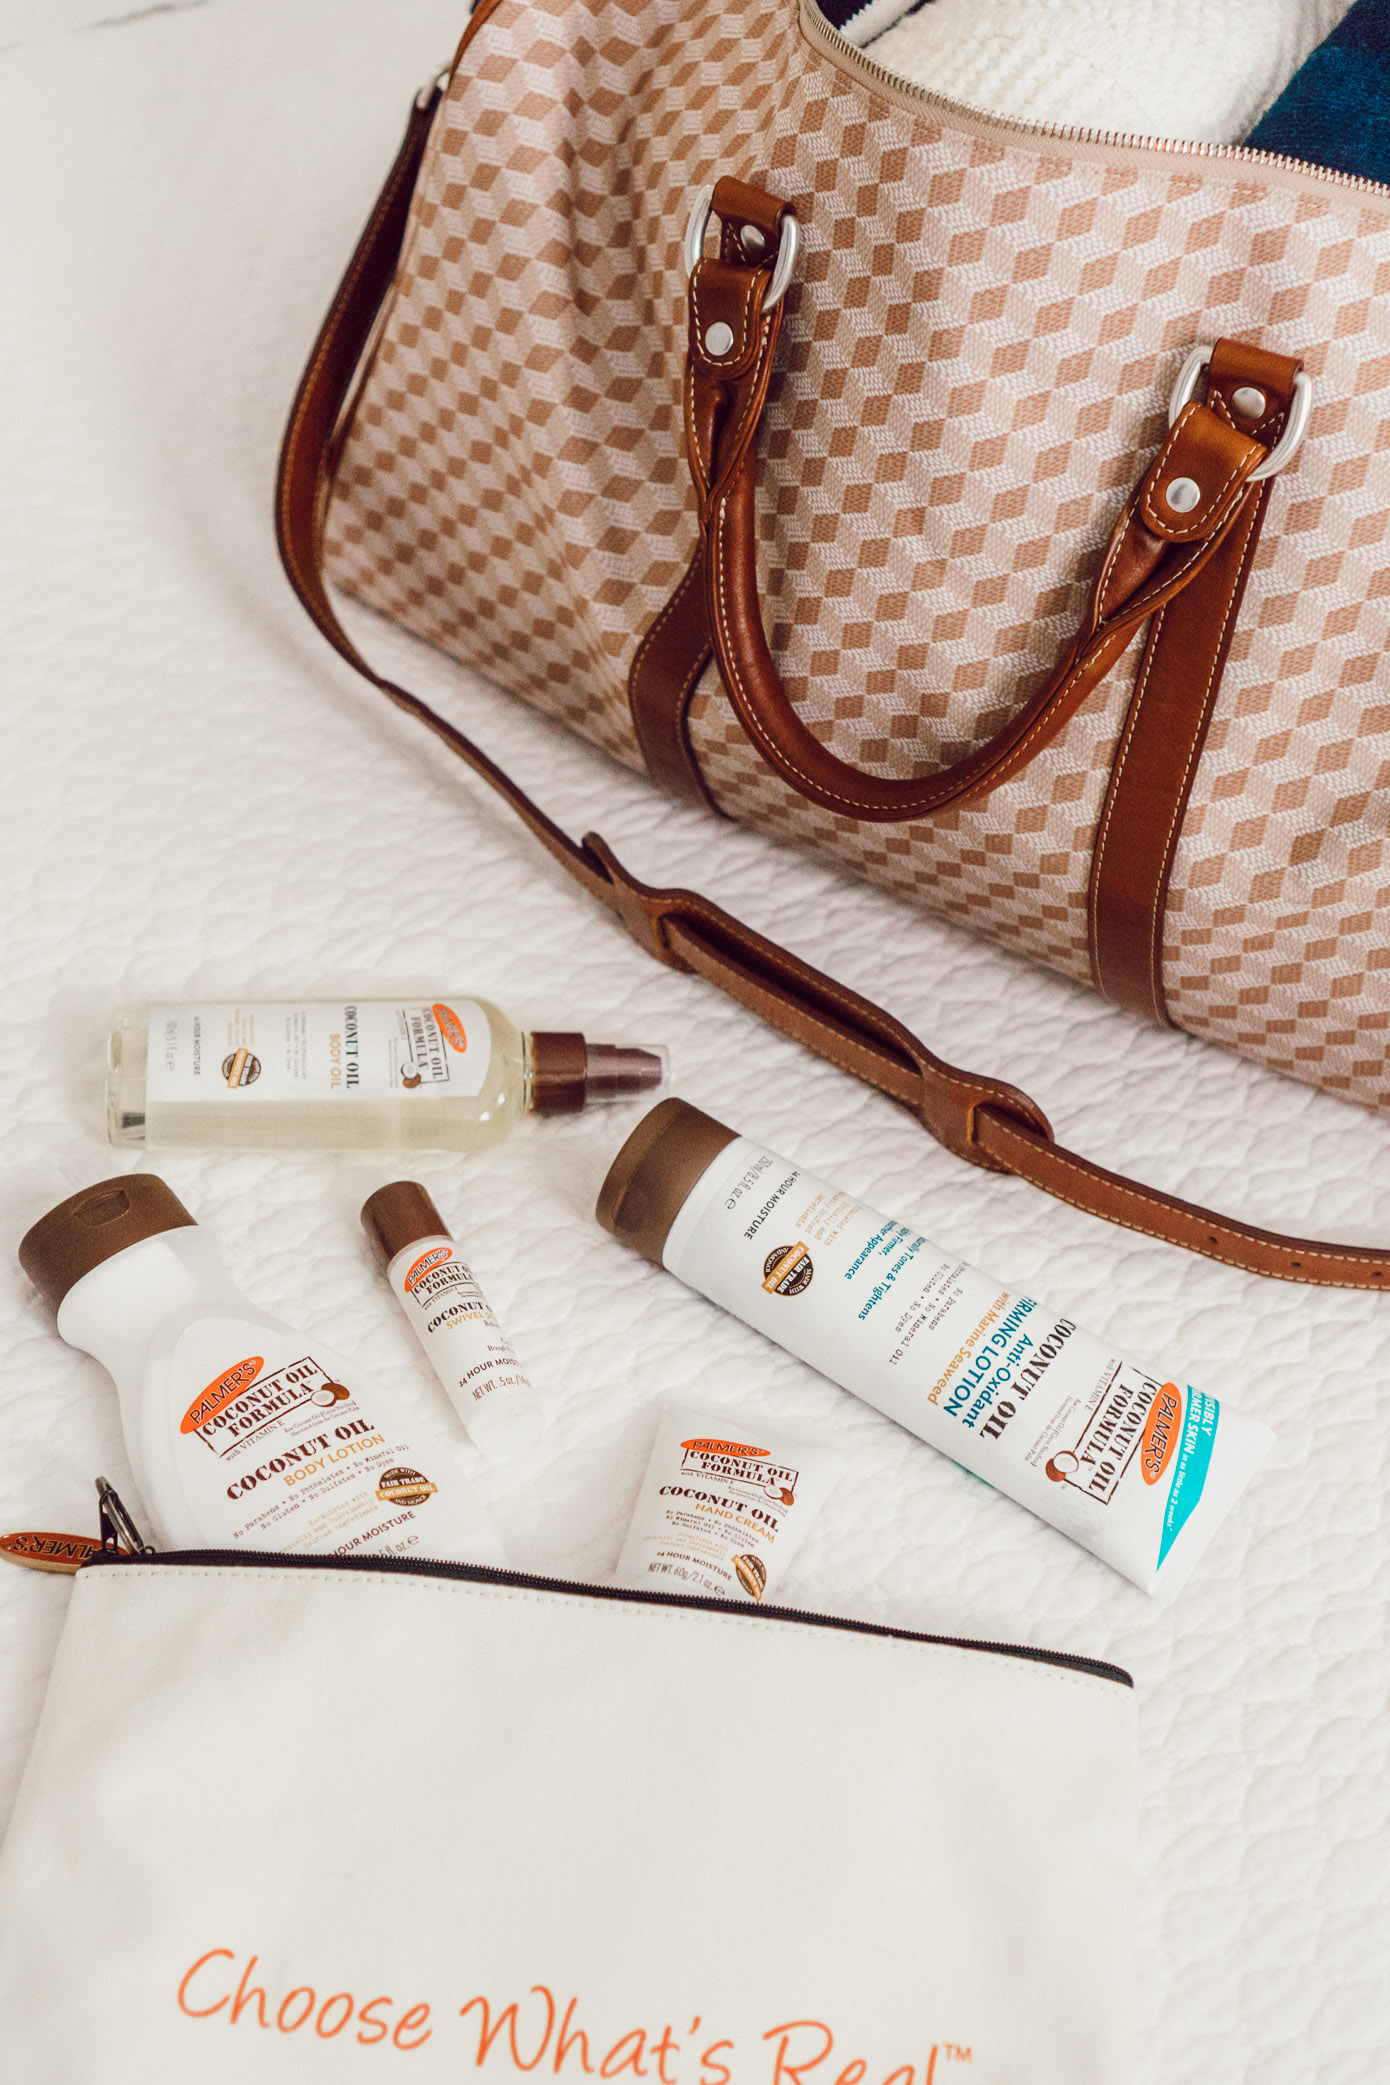 Palmer's Coconut Oil Skincare | Five Ways to Hydrate Your Skin While Traveling featured on Louella Reese